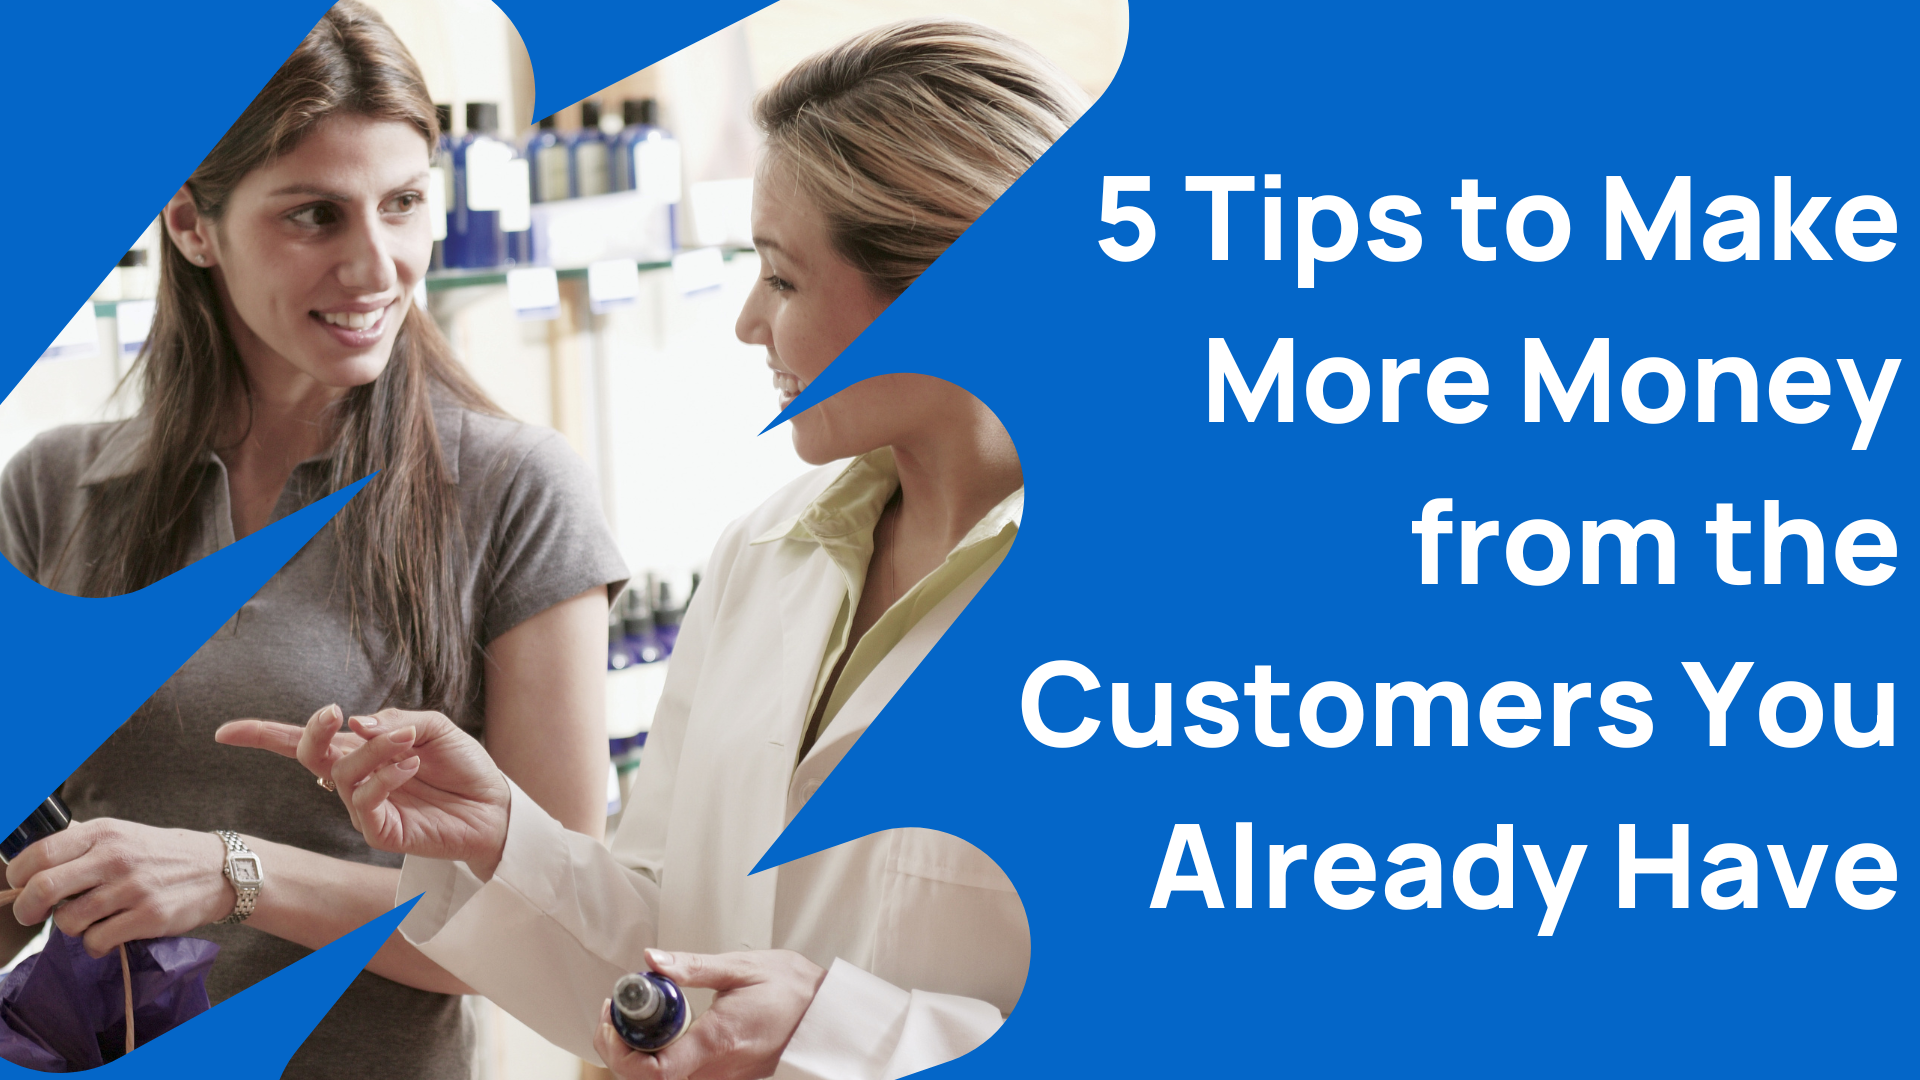 5 tips to make more money from the customers you already have title image